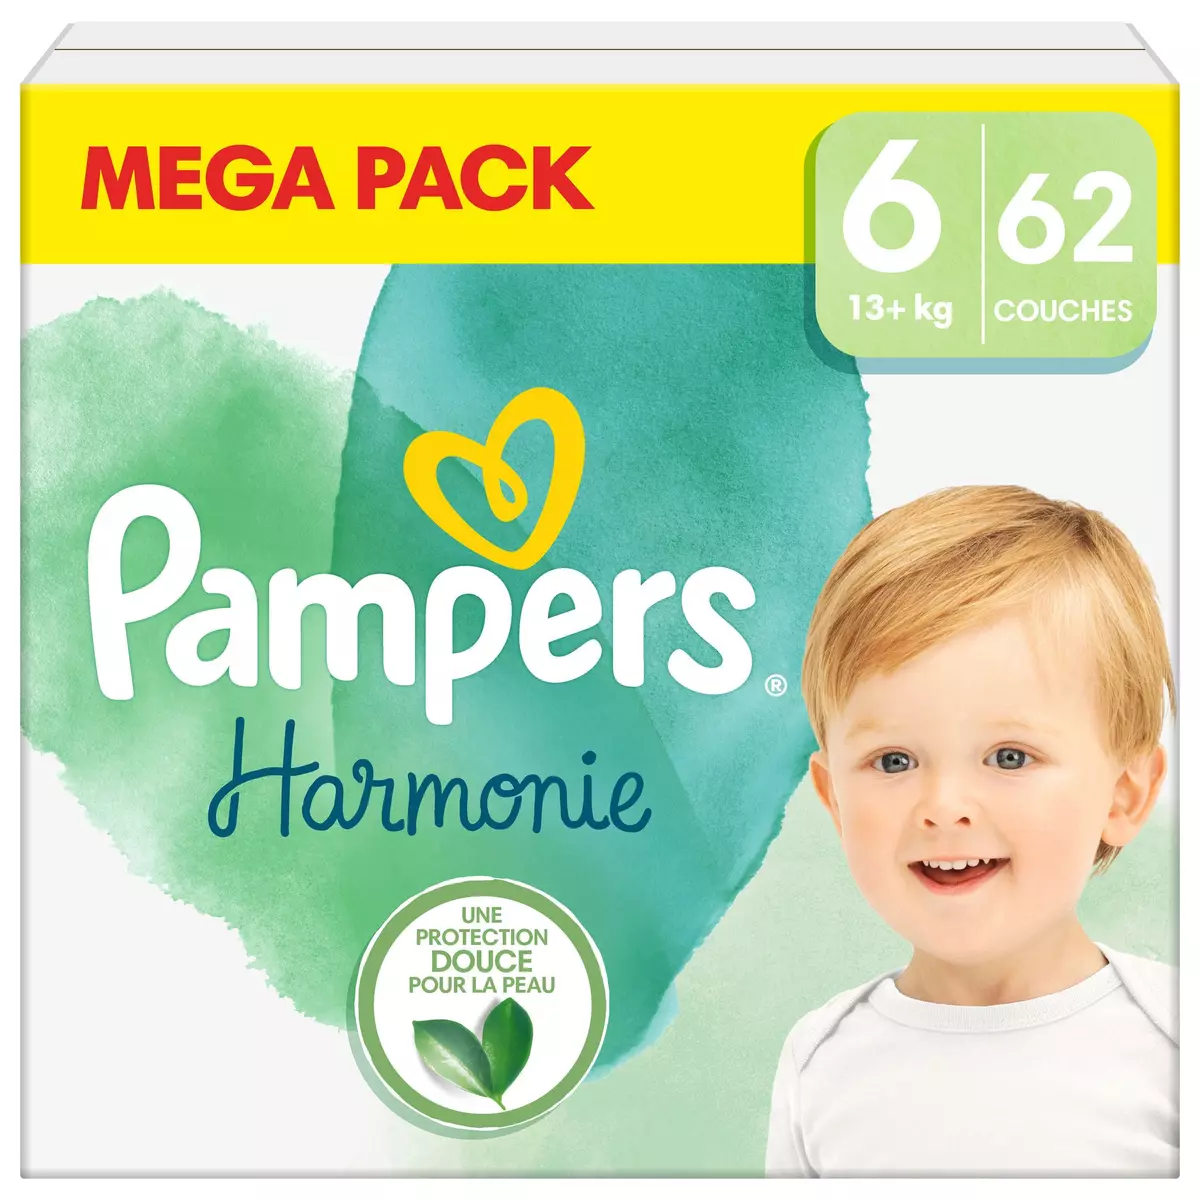 PAMPERS Harmonie Couches taille 6 (+13kg) 62 couches